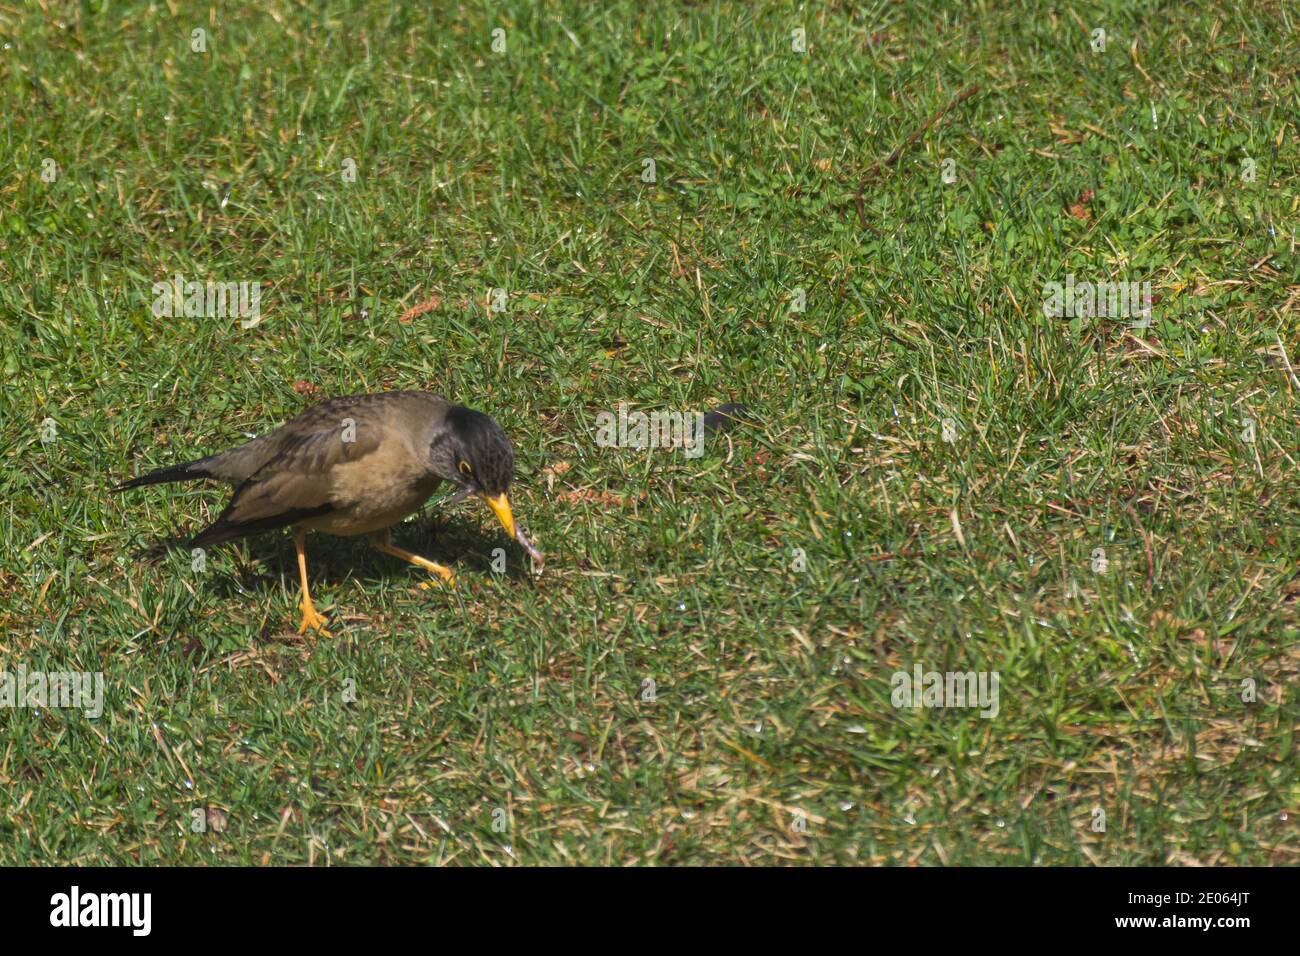 Clouse up view of Austral thrush (Turdus falcklandii) on a green grass in Patagonia, Argentina Stock Photo